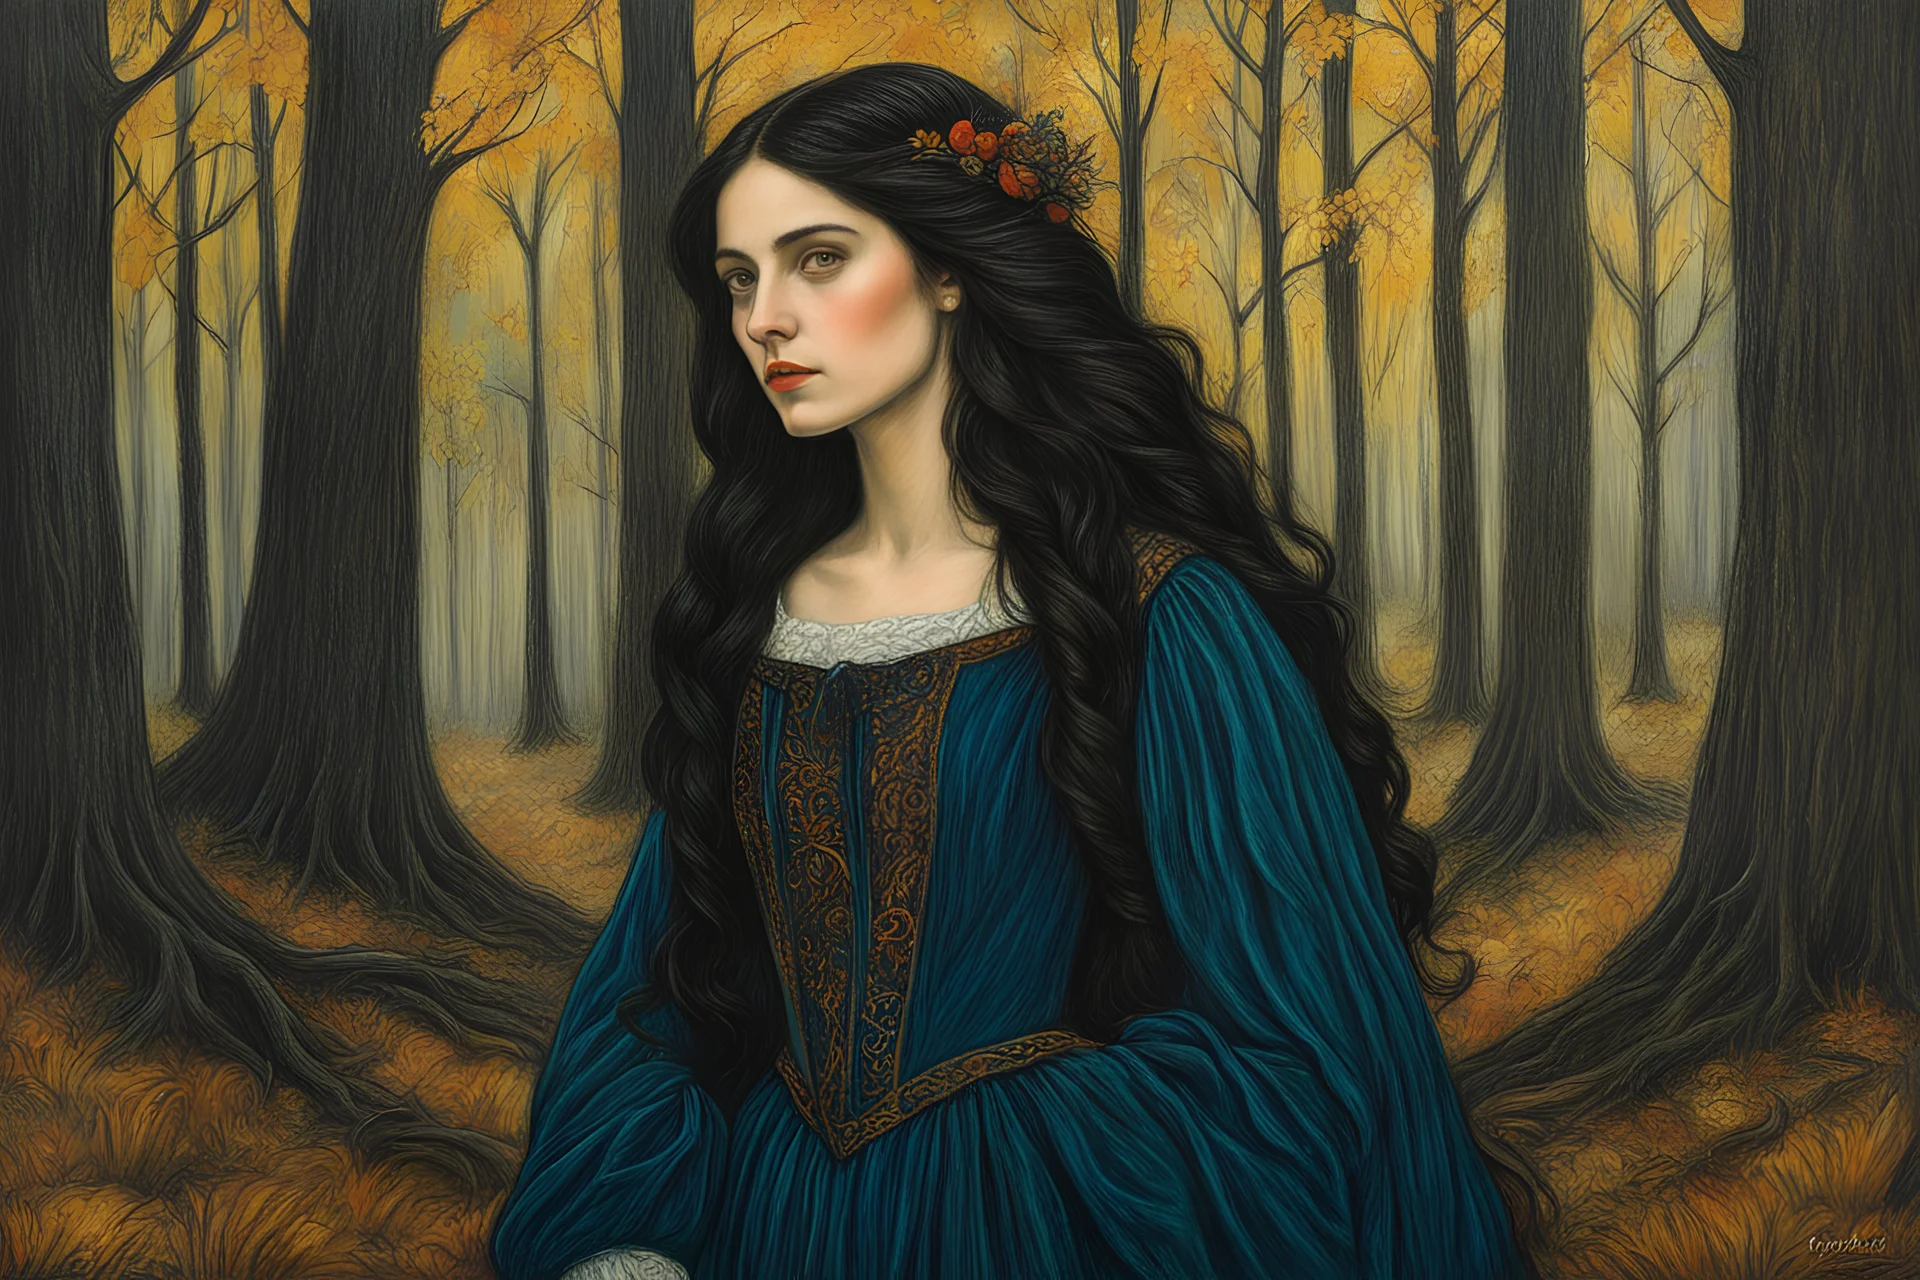 create a 3/4 profile, full body oil pastel of a dark haired, savage, ornately dressed, vampire girl with highly detailed , sharply defined hair and facial features , in a quiet autumn forest glade at dawn, in the Pre-Raphaelite style of JOHN WILLIAM WATERHOUSE